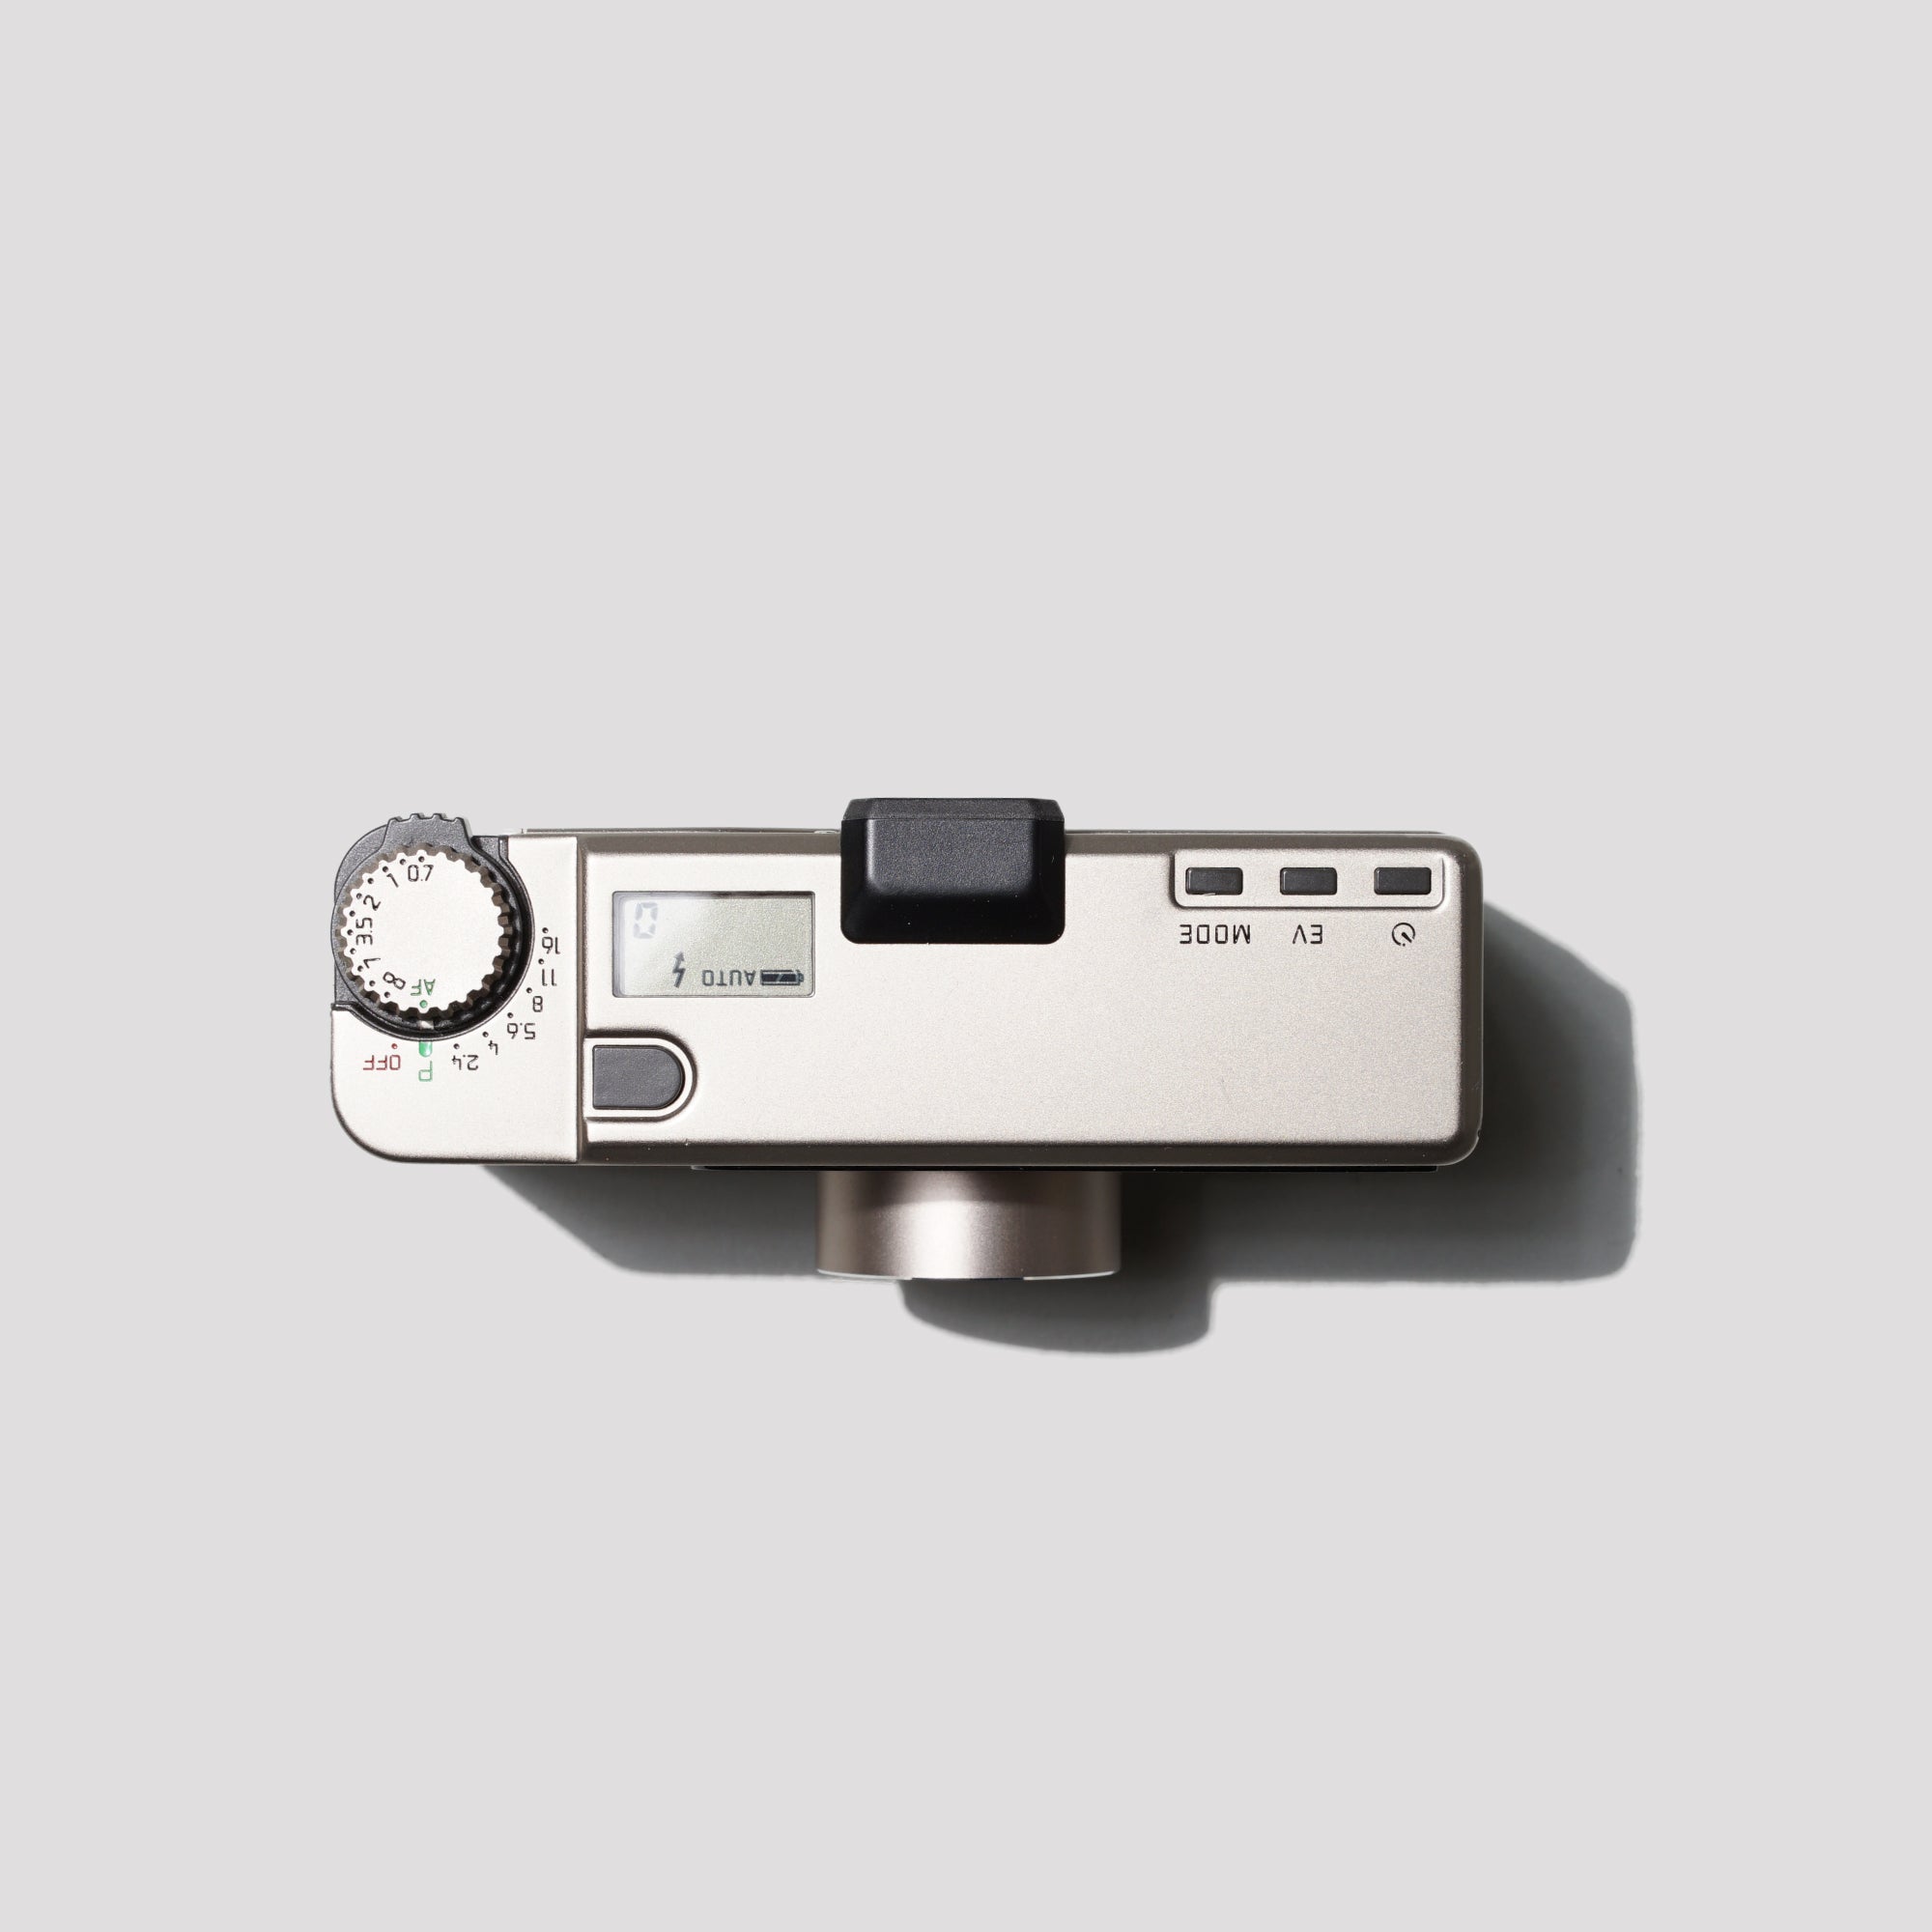 Buy Leica Minilux now at Analogue Amsterdam